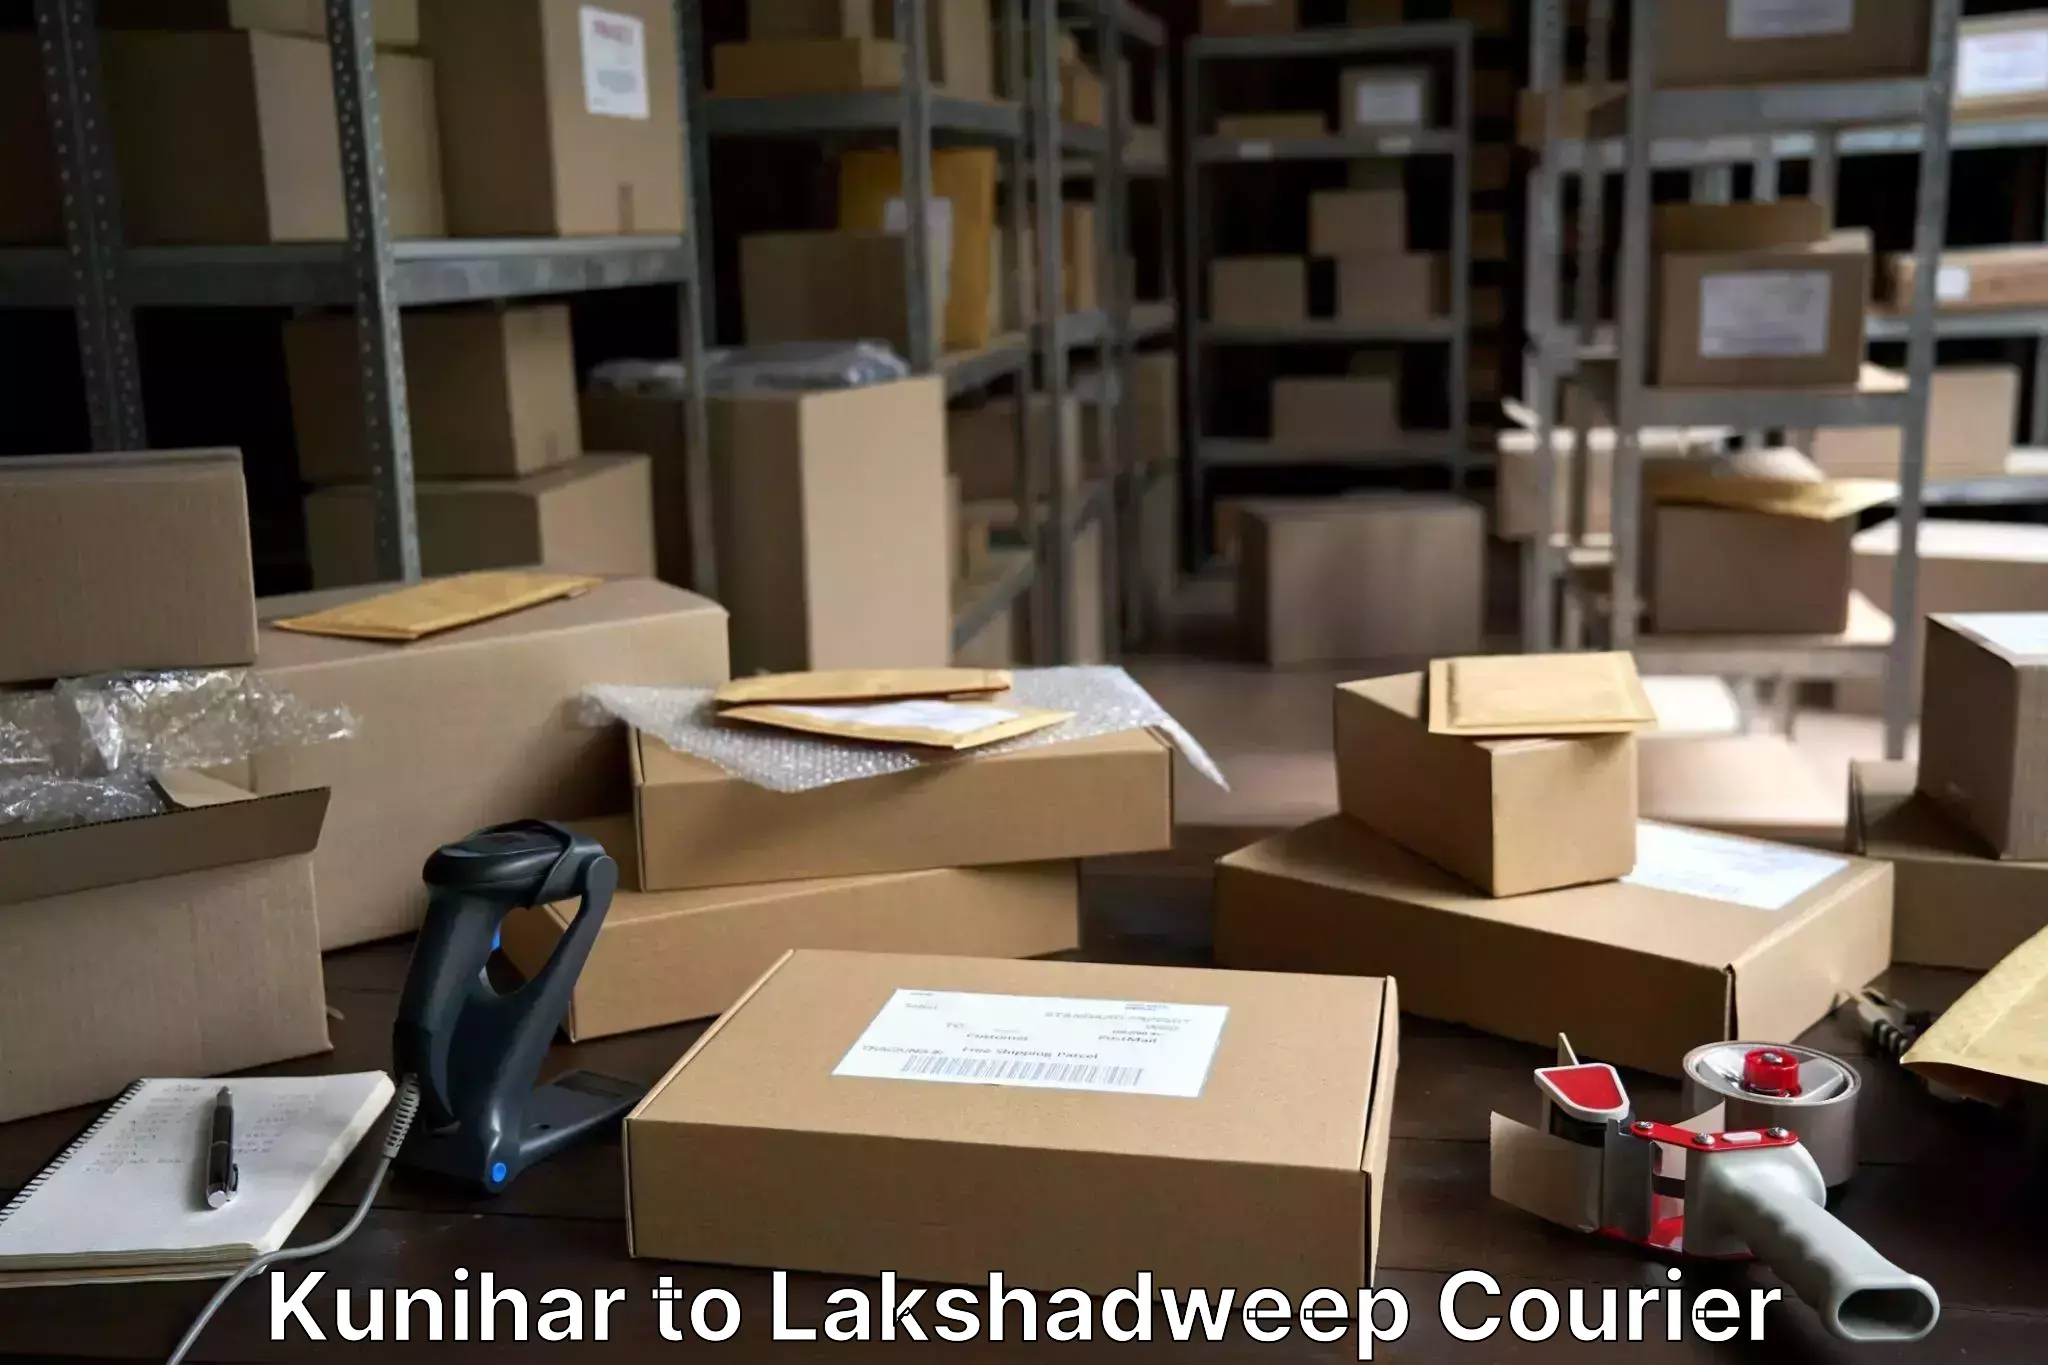 Luggage transport consulting Kunihar to Lakshadweep